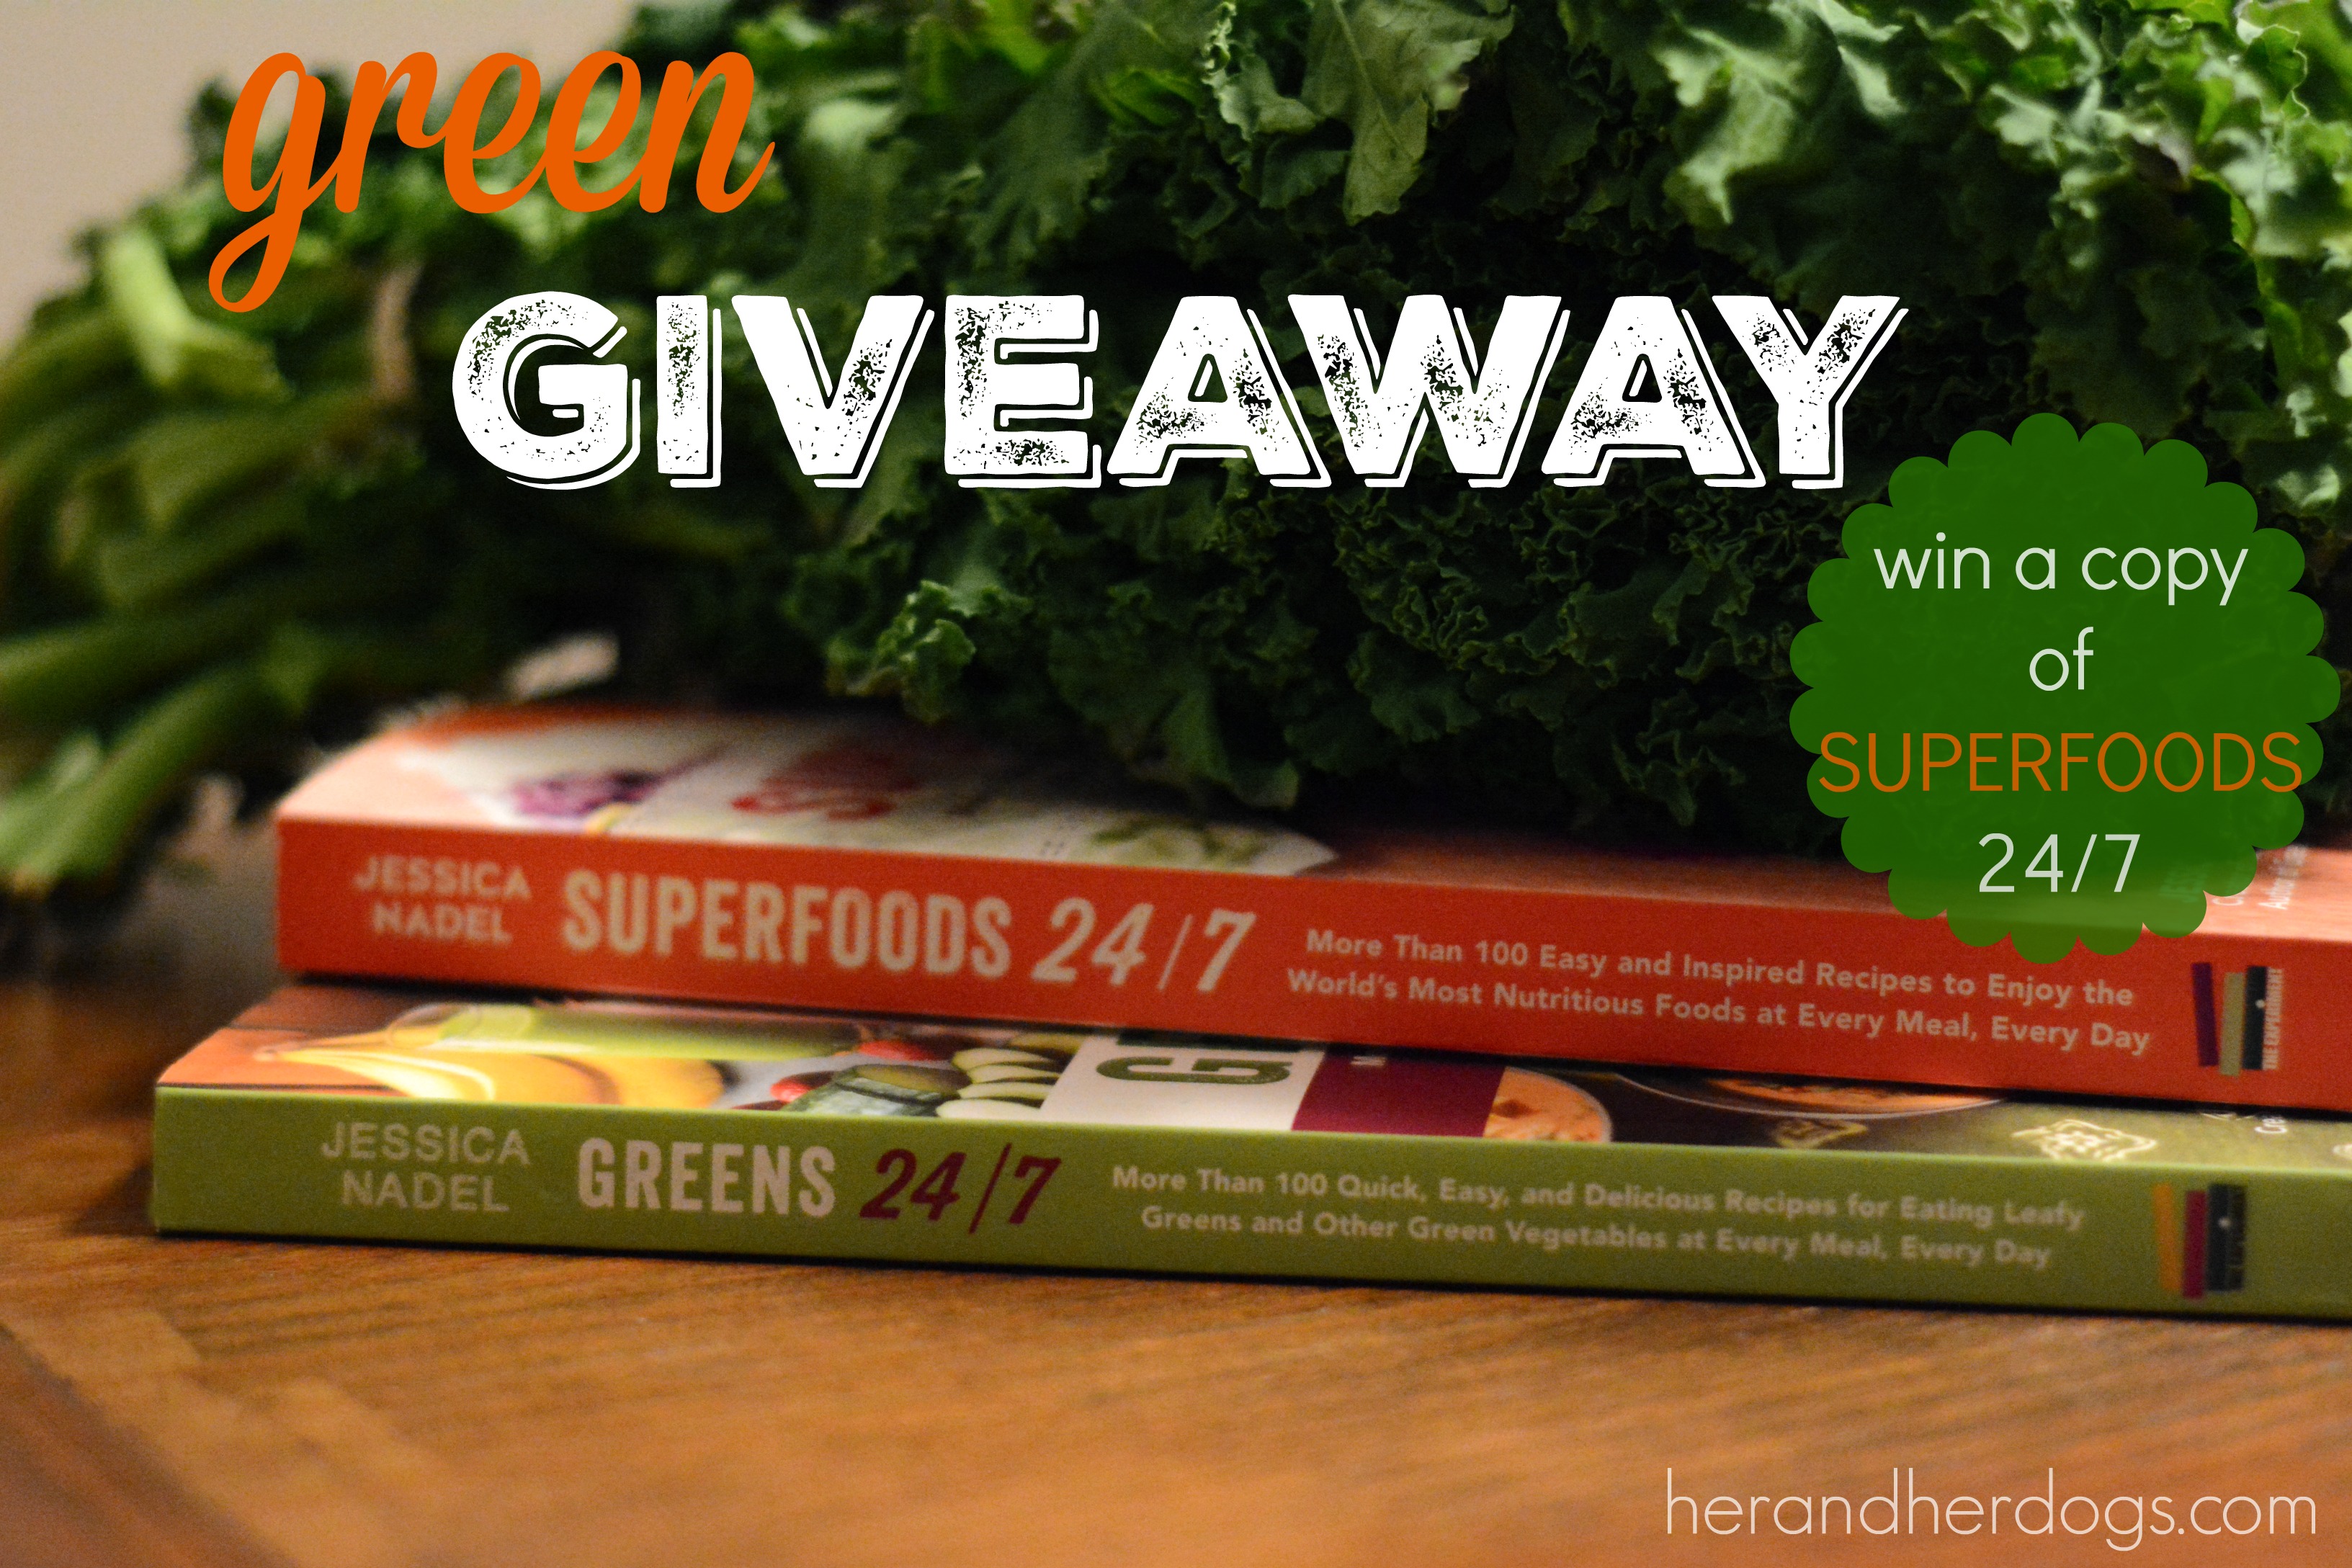 You could win a copy of SUPERFOODS 24/7